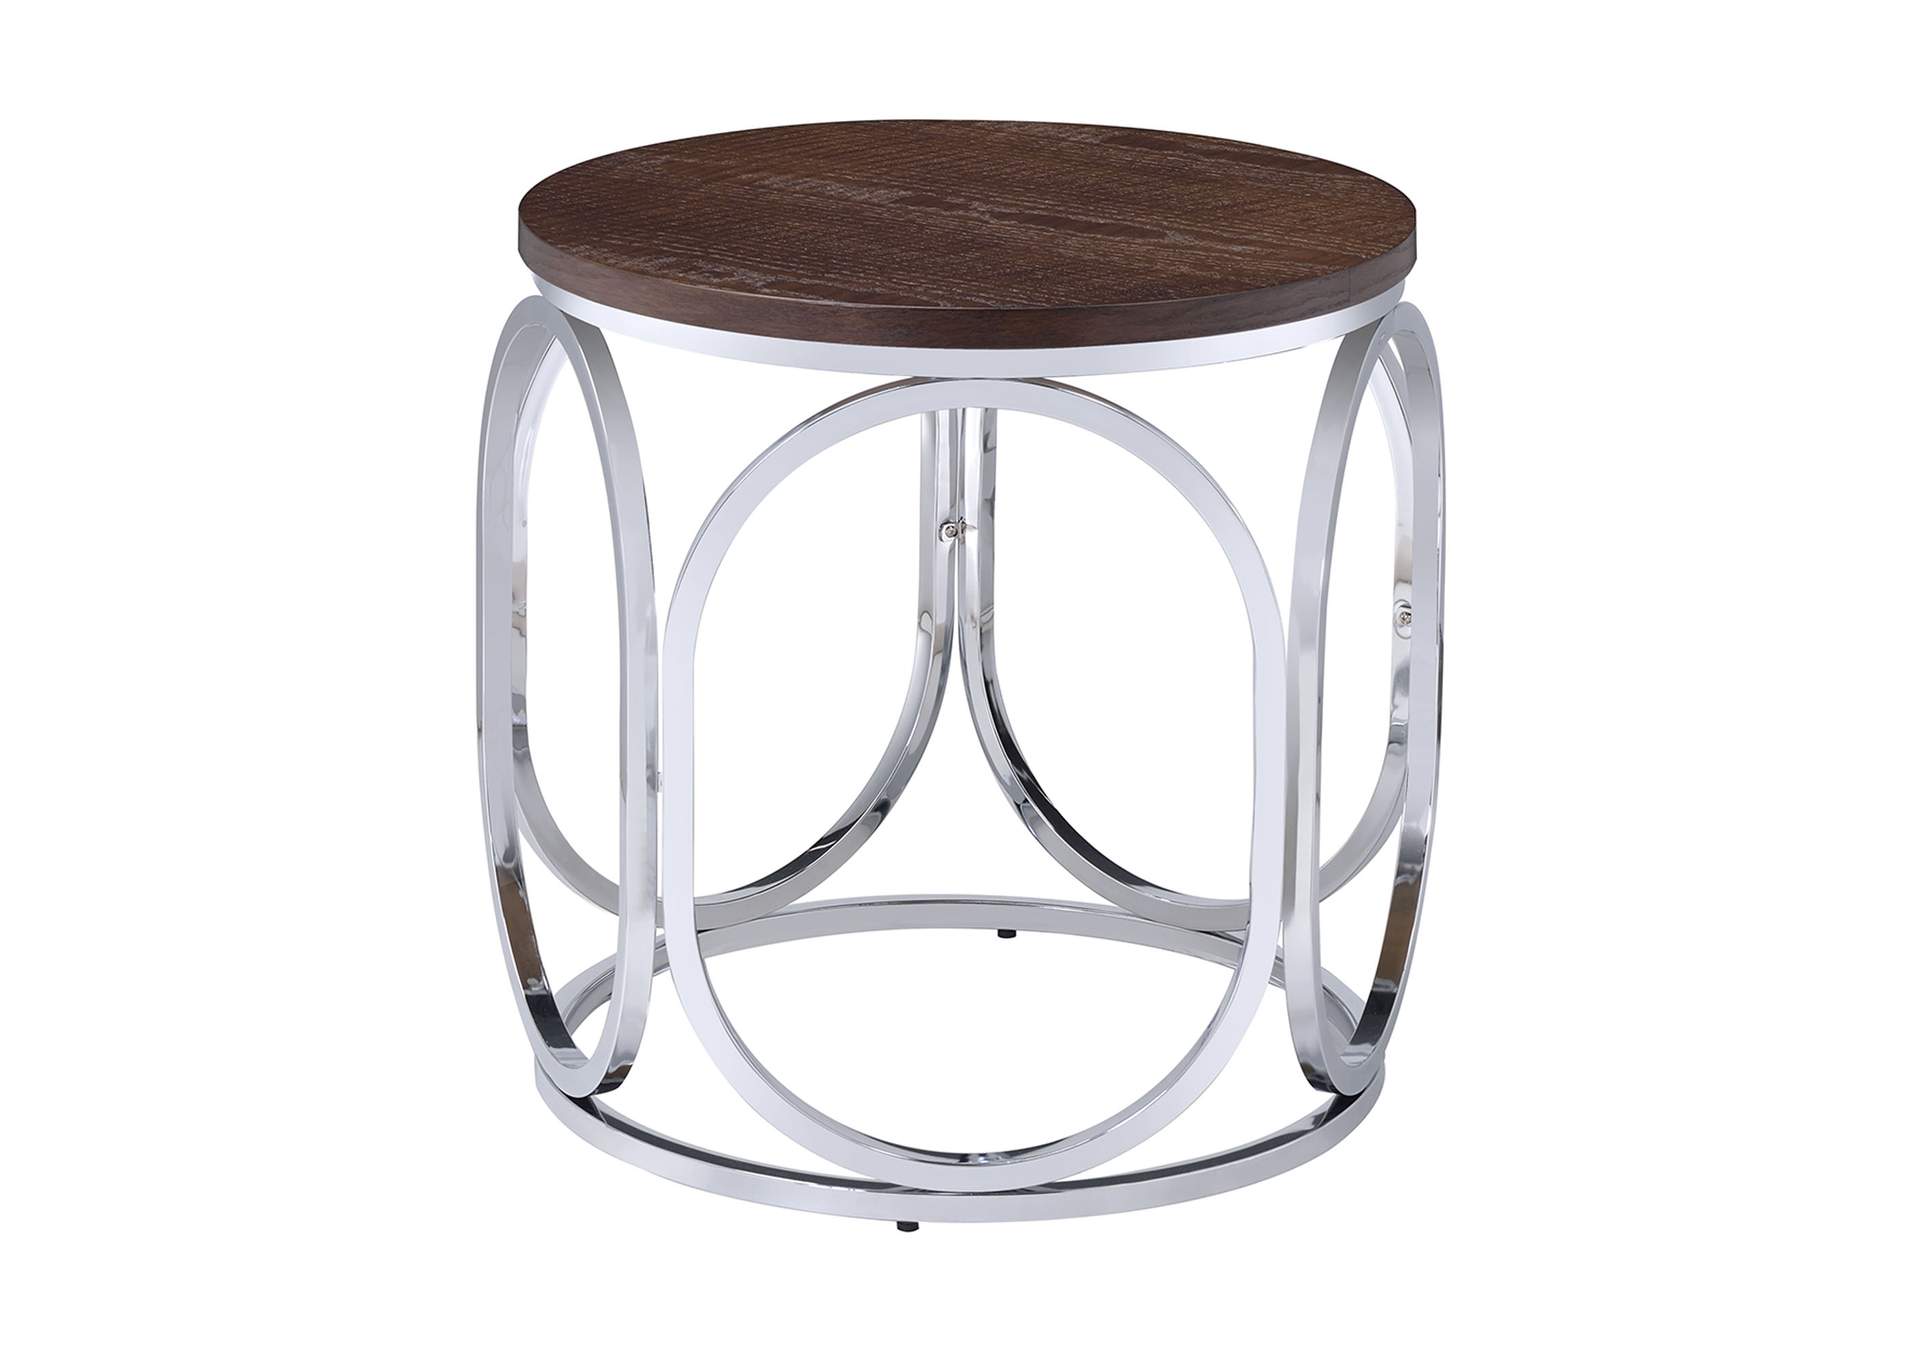 Alexis C - 103C - 1104 End Table Upgrade,Elements